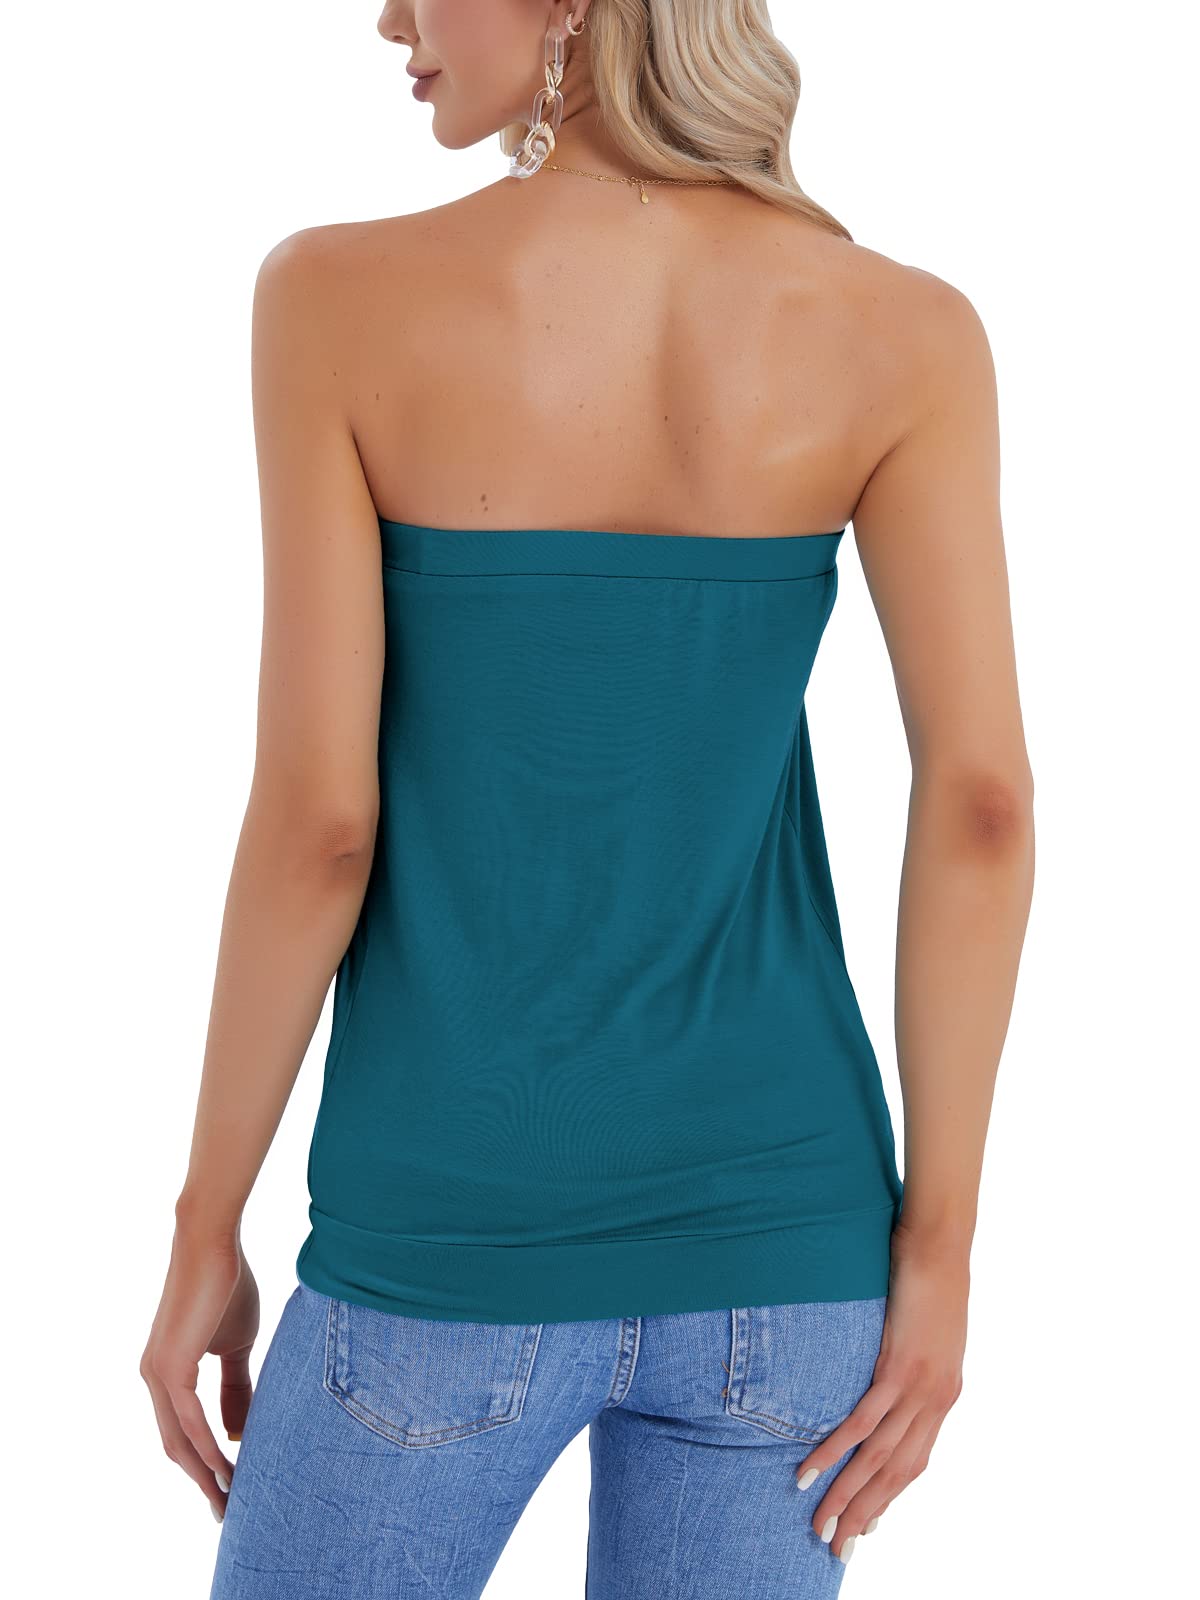 DJT Teal/Black/Purple/Red/Navy Summer Beach Sleeveless Women's Stretchy Pleated Tube Tops